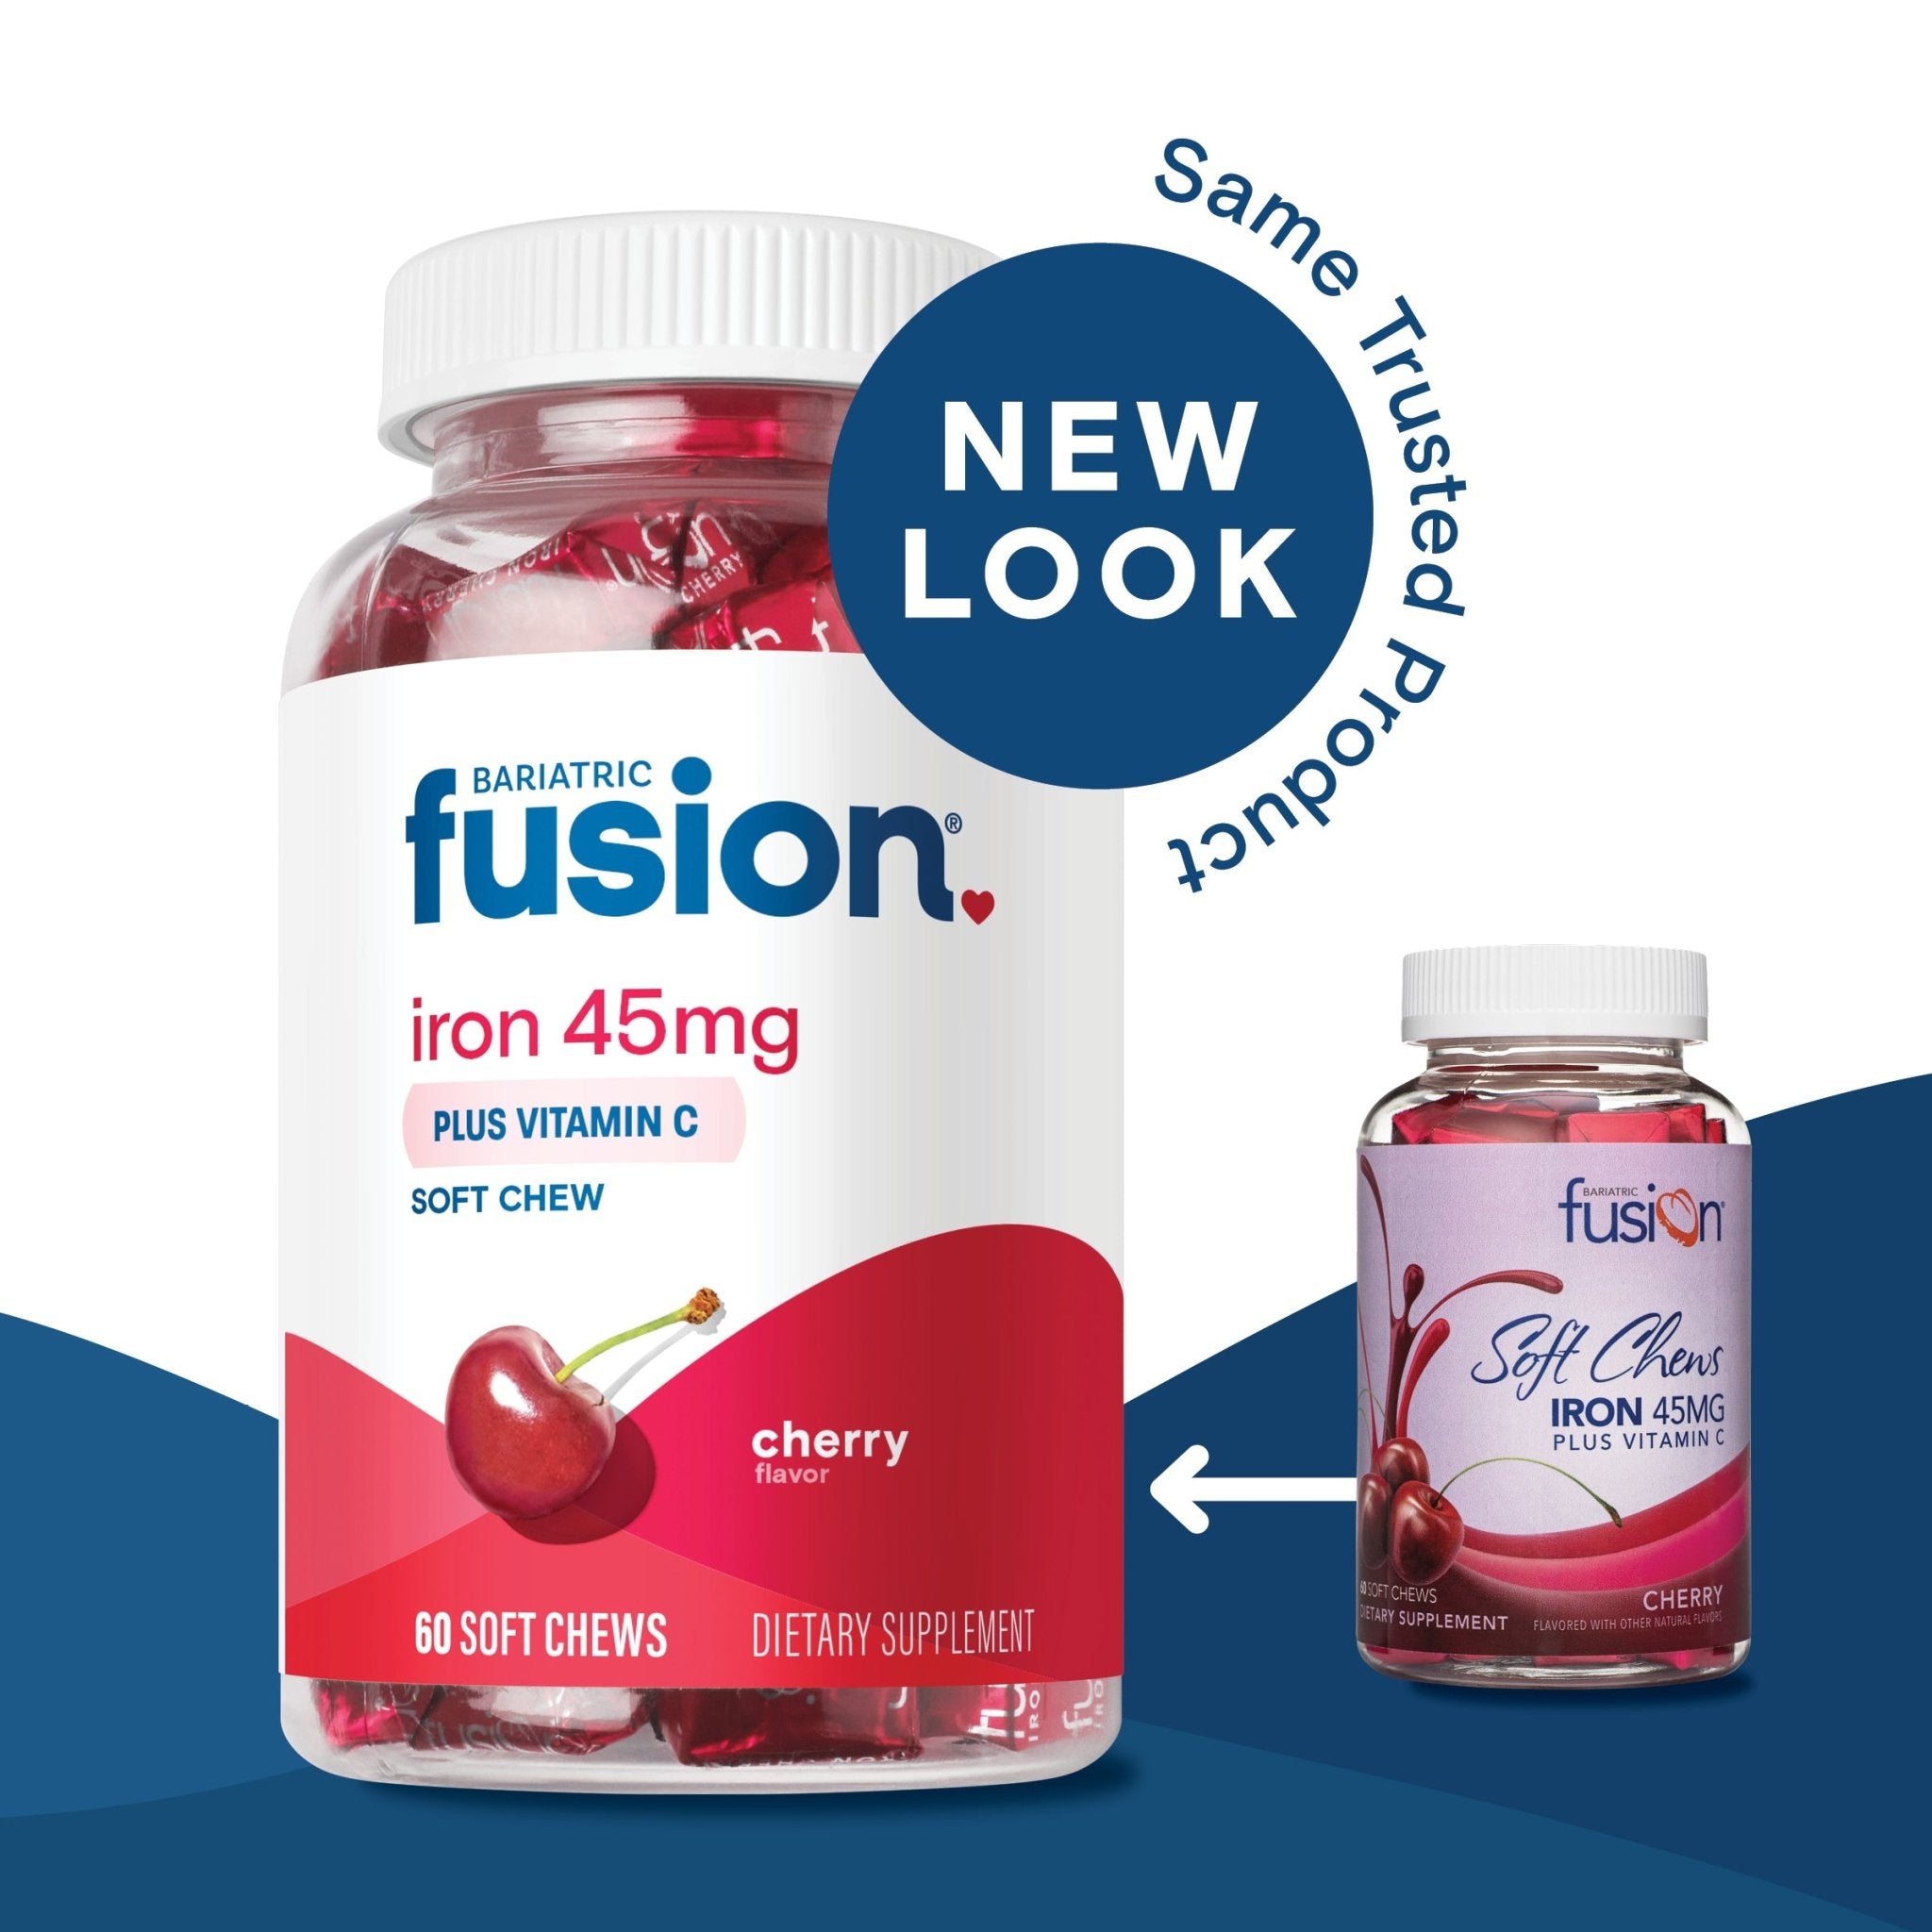 Cherry Bariatric Iron Soft Chew with Vitamin C new look, same trusted product.